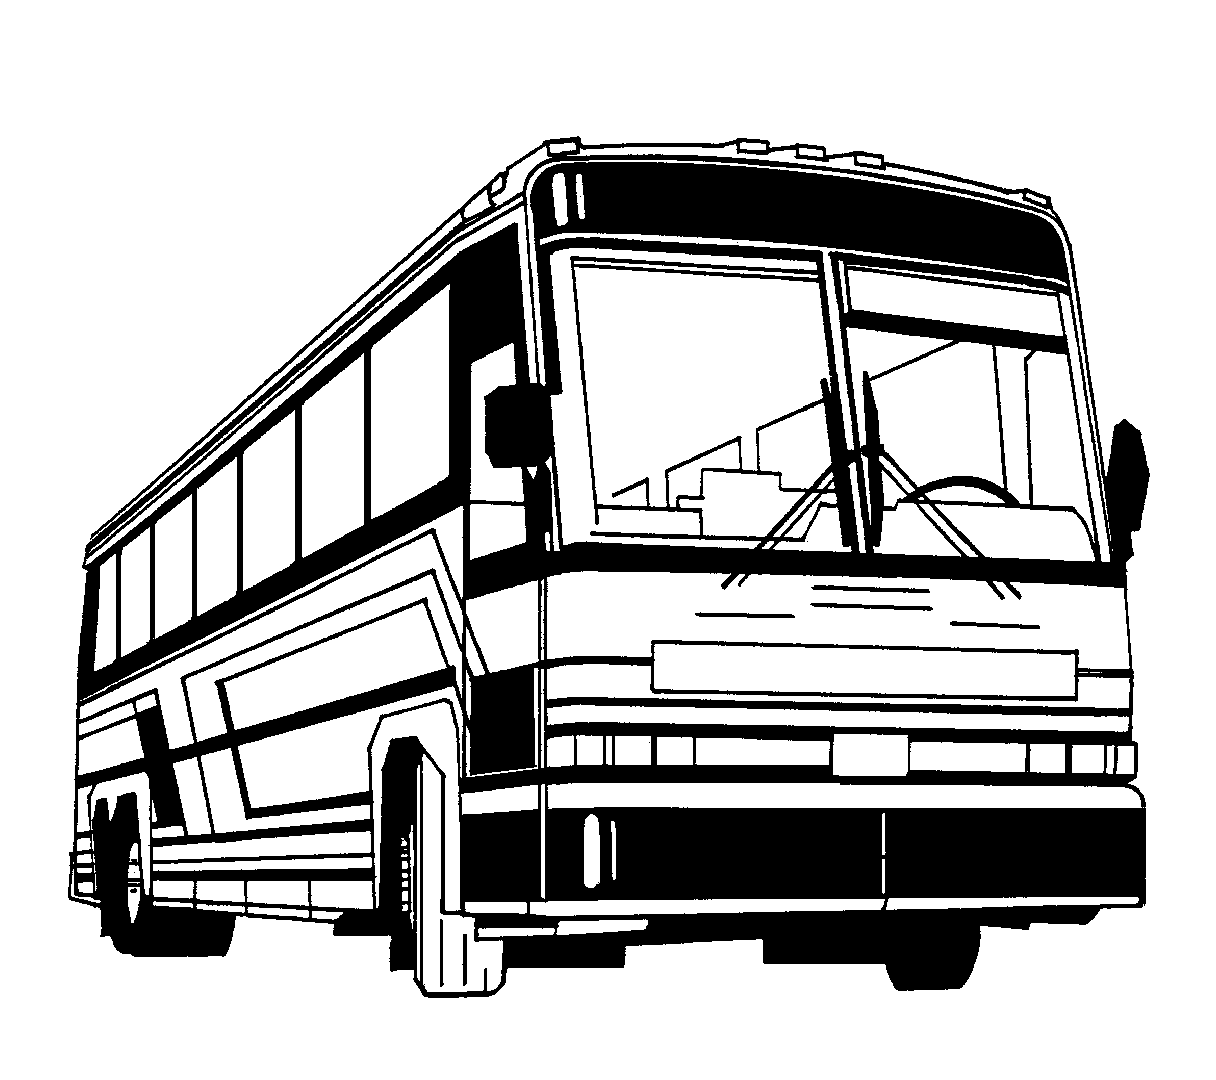 Free Bus Picture, Download Free Clip Art, Free Clip Art on.